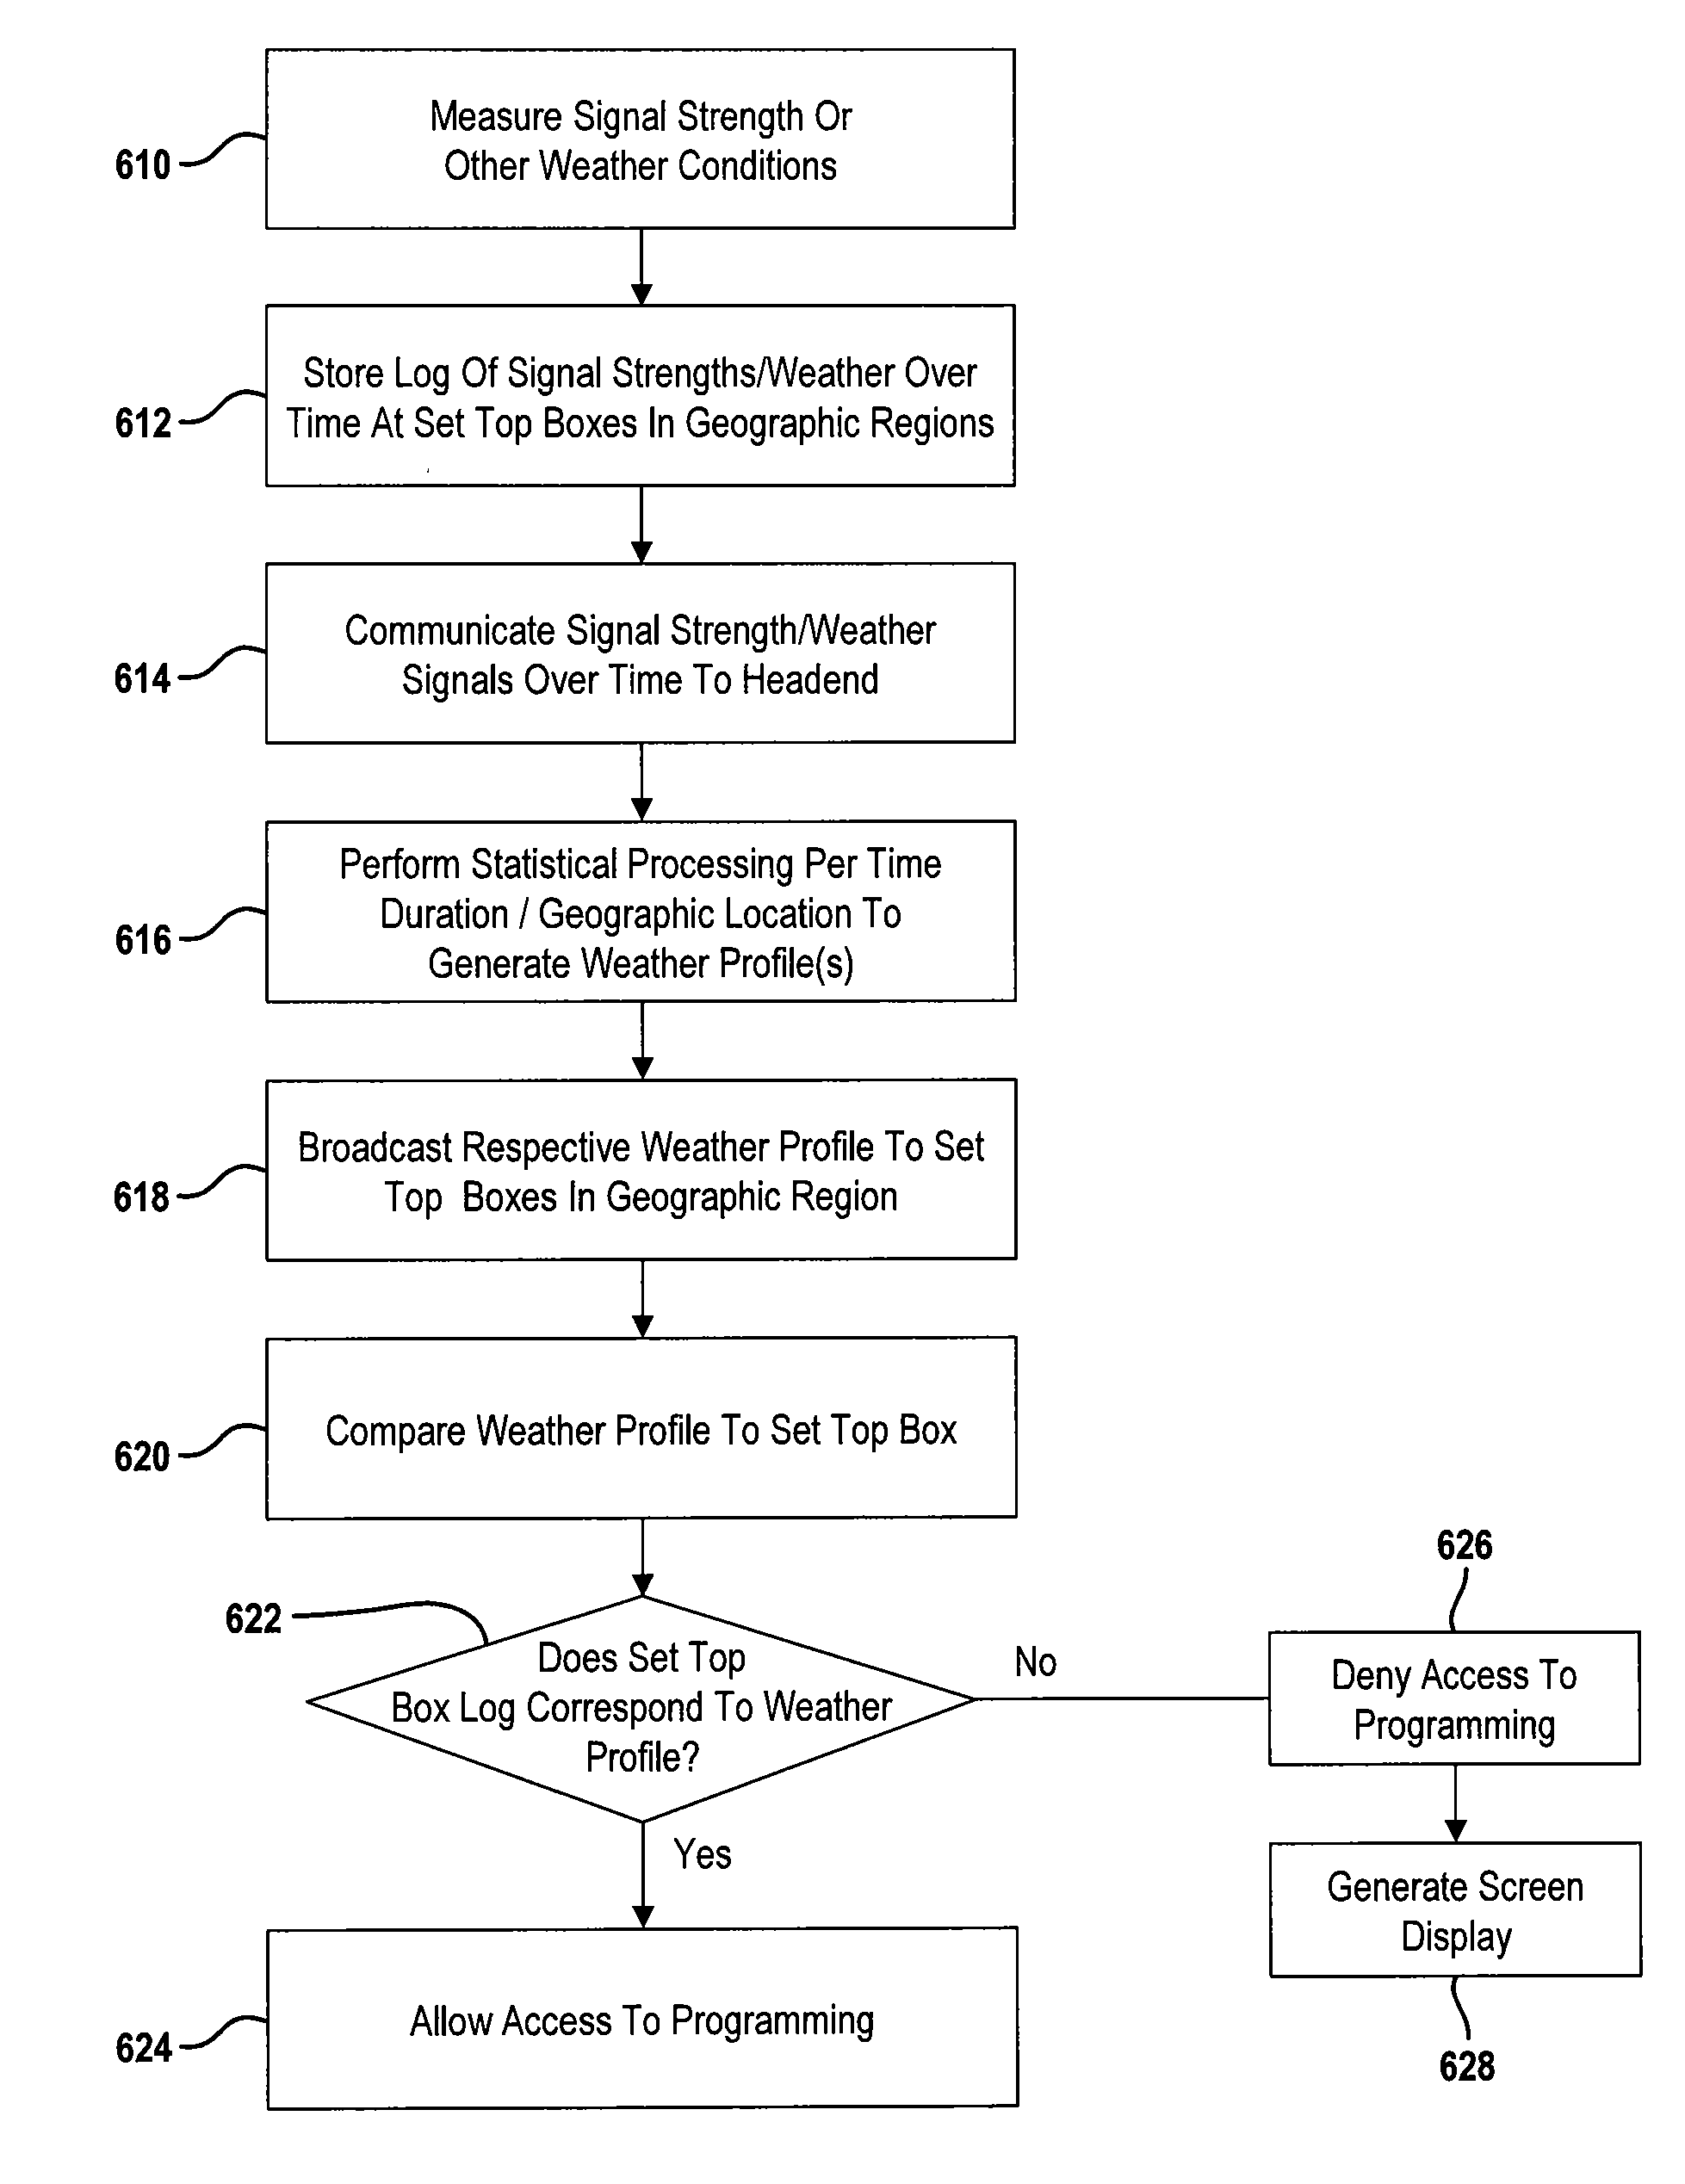 Method and system for detecting unauthorized use of a set top box using weather profiles